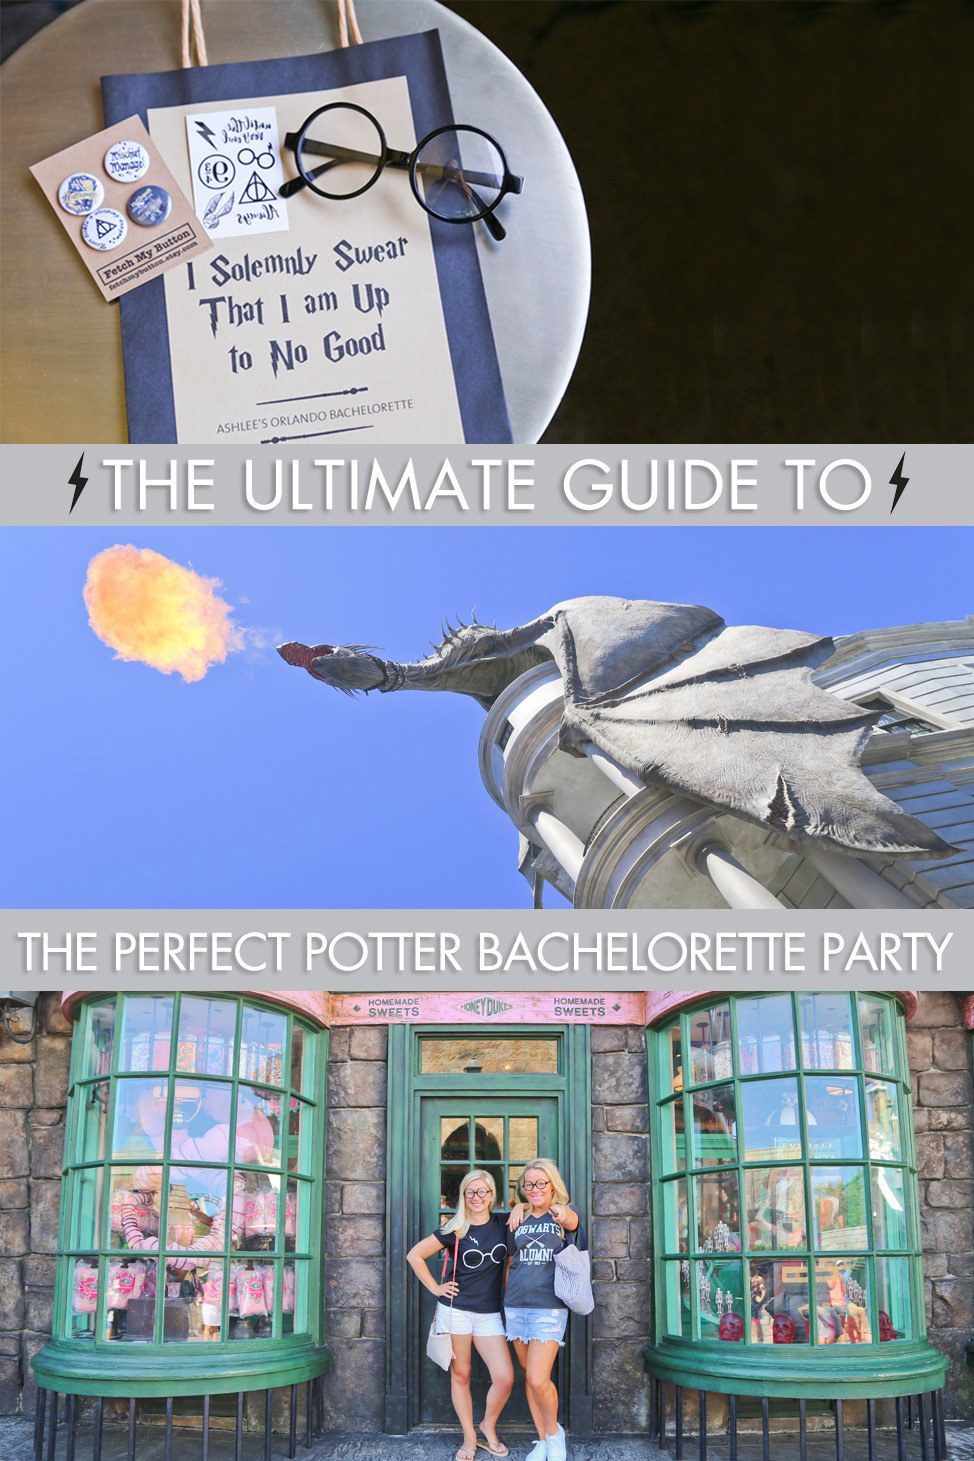 How to Throw A Harry Potter Bachelorette Party at Universal Orlando